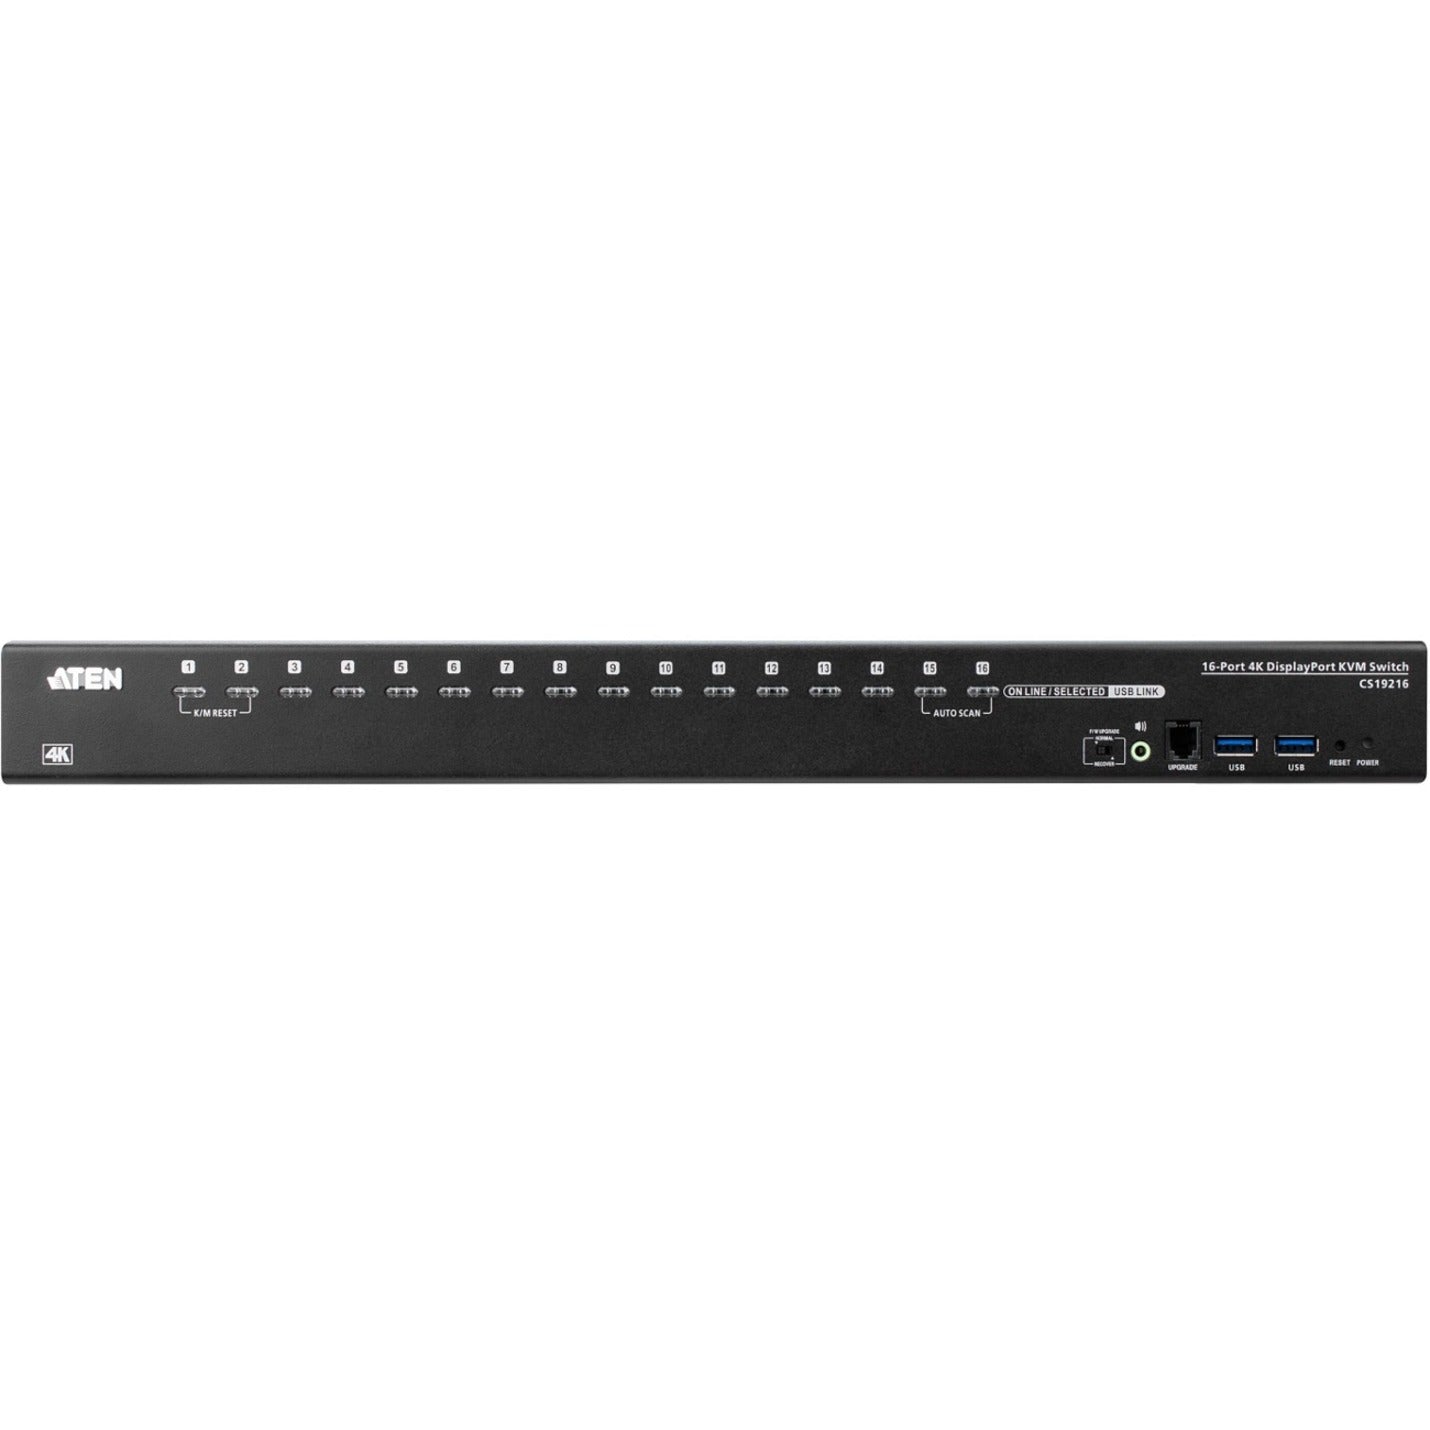 ATEN CS19216 16-Port USB 3.0 4K DisplayPort KVM Switch with Rack Mounting Kit, High-Performance Control for Multiple Computers